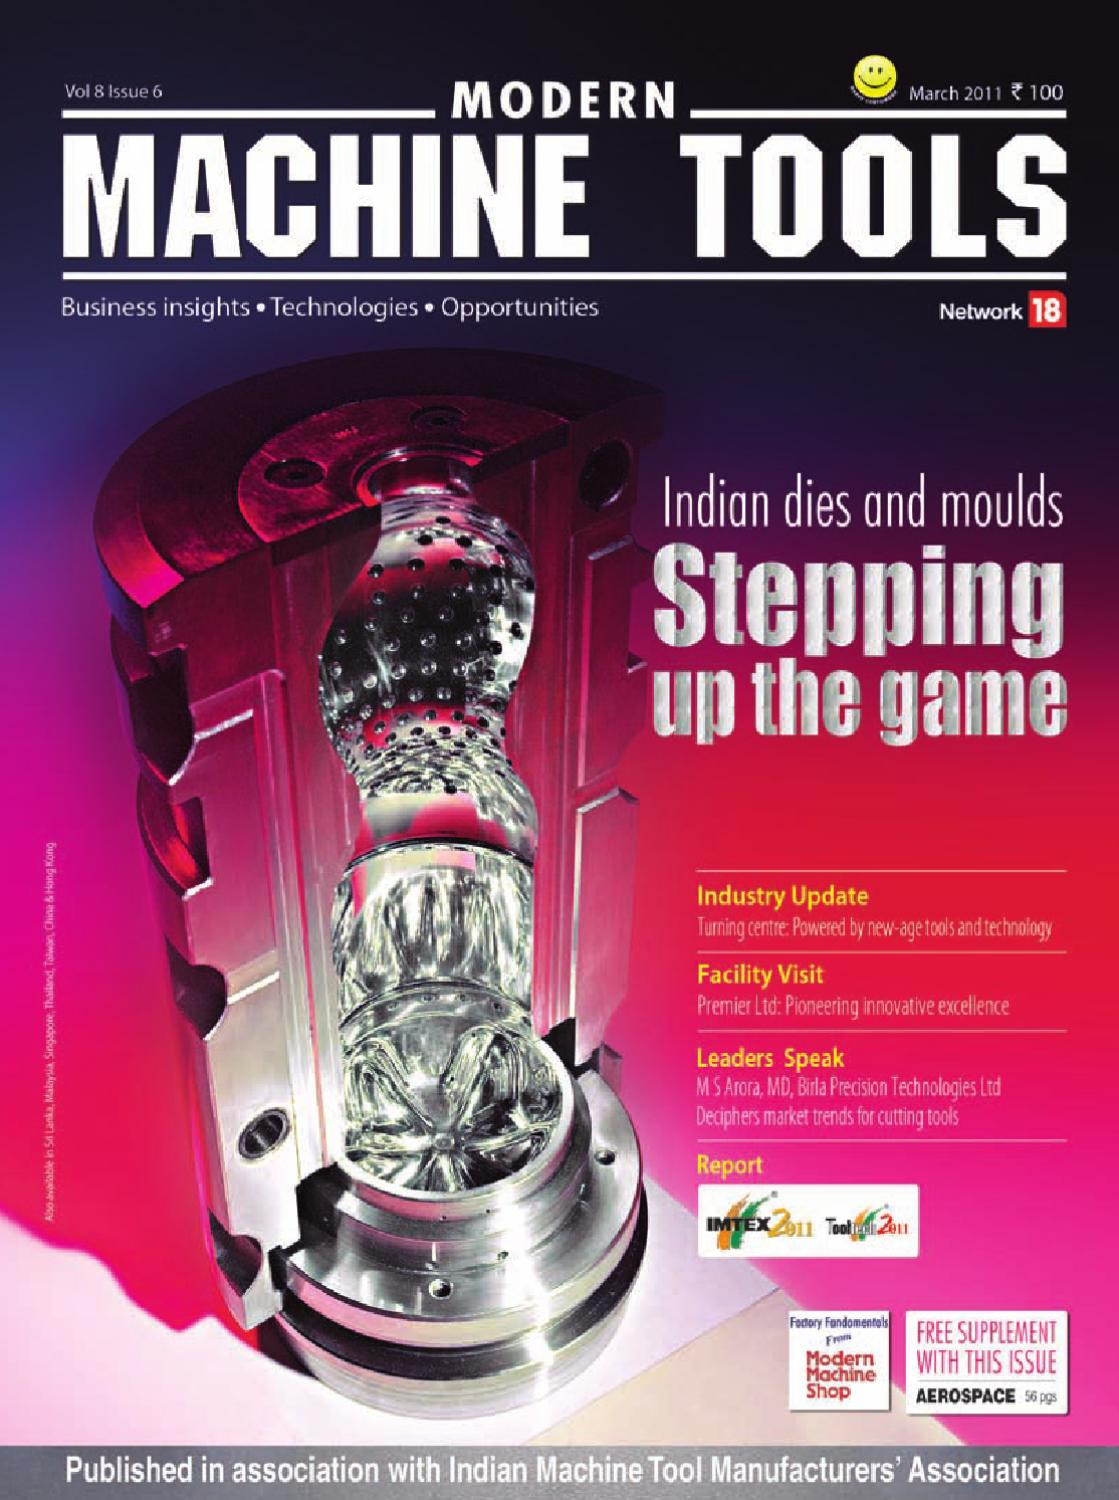 Received Numeros Adcoles Sample for Resume Modern Machine tools – March 2011 by Infomedia18 – issuu